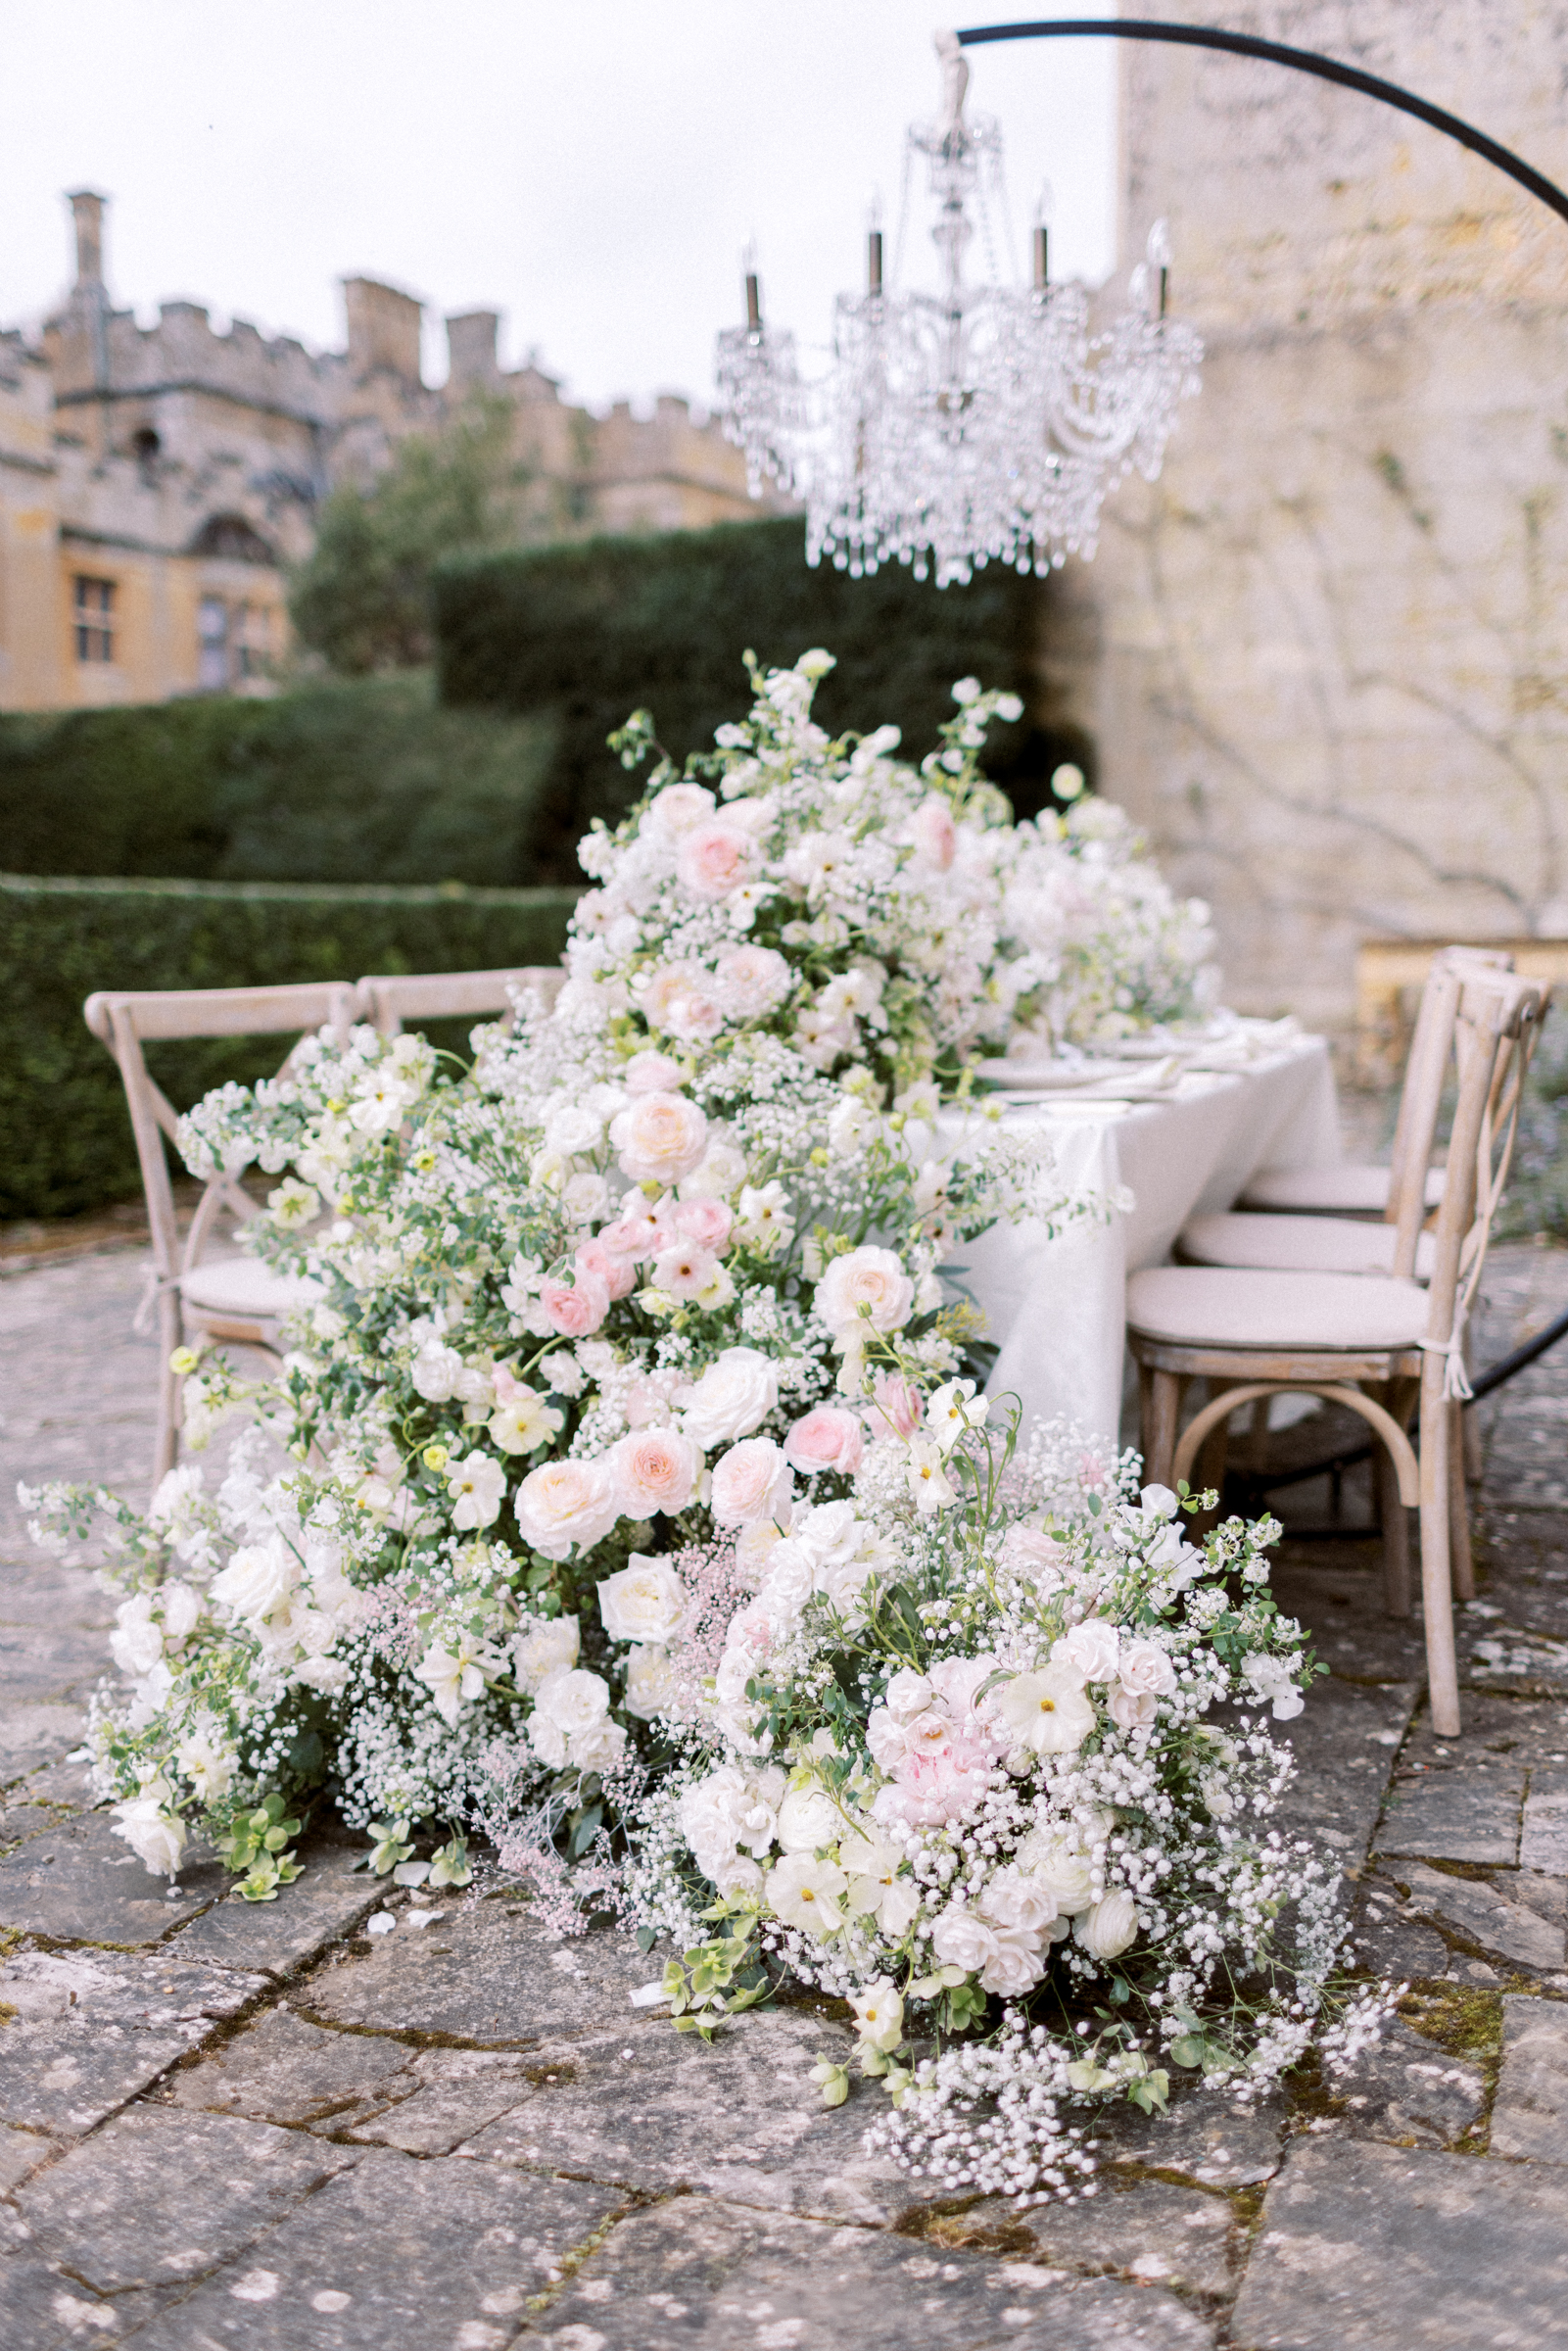 Stunning wedding flowers at Jess & Sam's Sudeley Castle Wedding in the Cotswolds